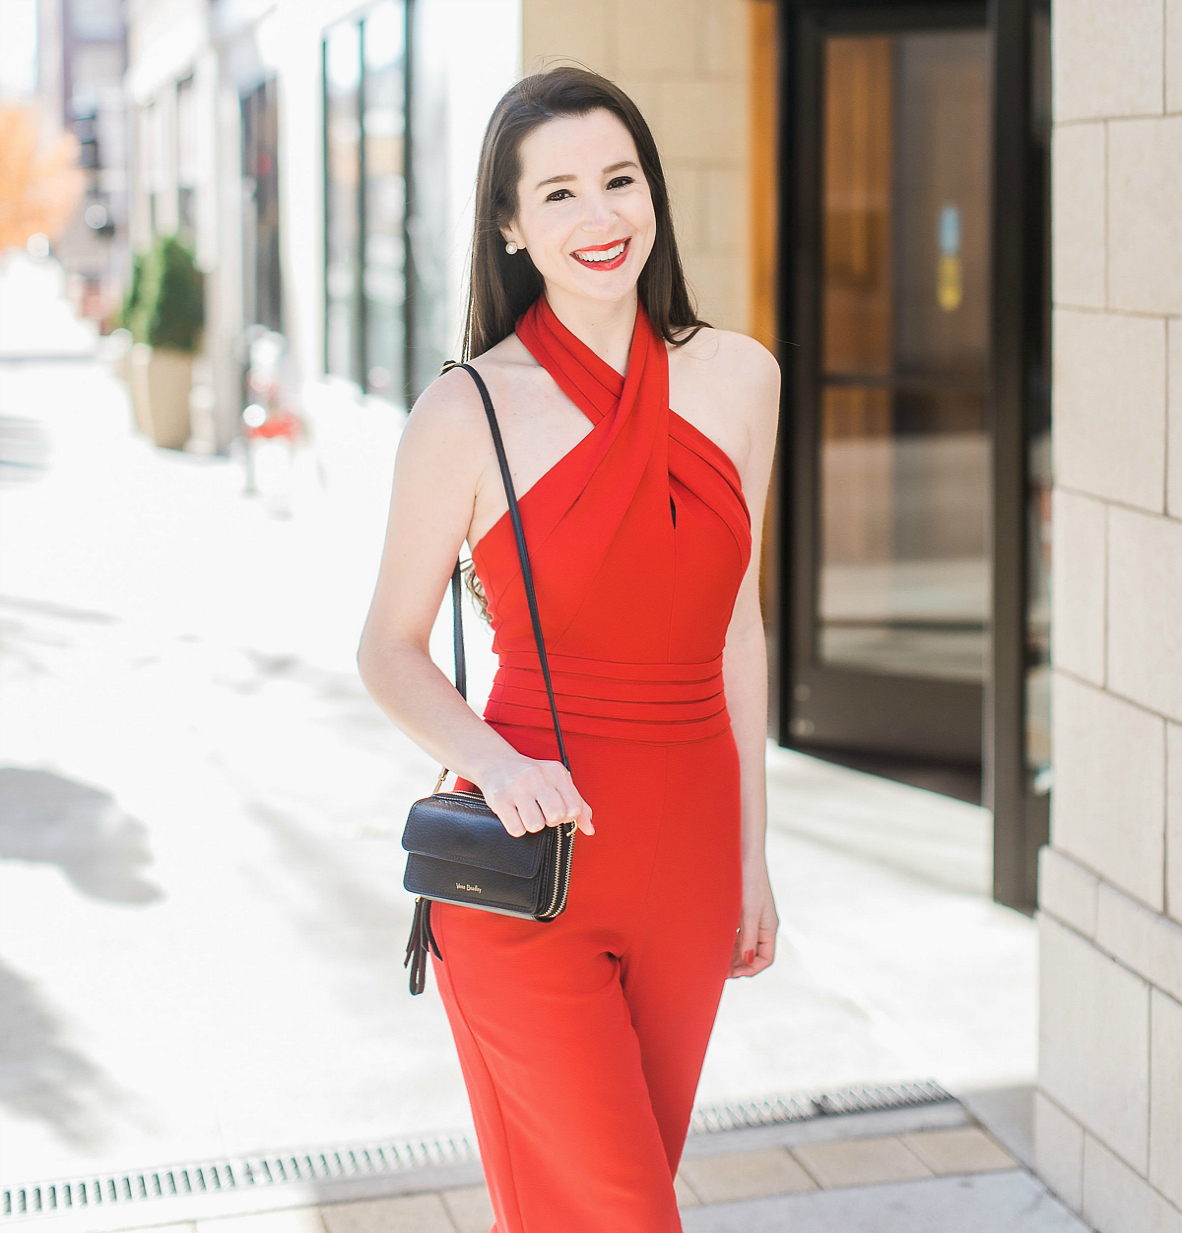 Black leather Vera Bradley RFID All in One Crossbody styled with a red wide leg jumpsuit for holiday parties by affordable fashion blogger Stephanie Ziajka on Diary of a Debutante